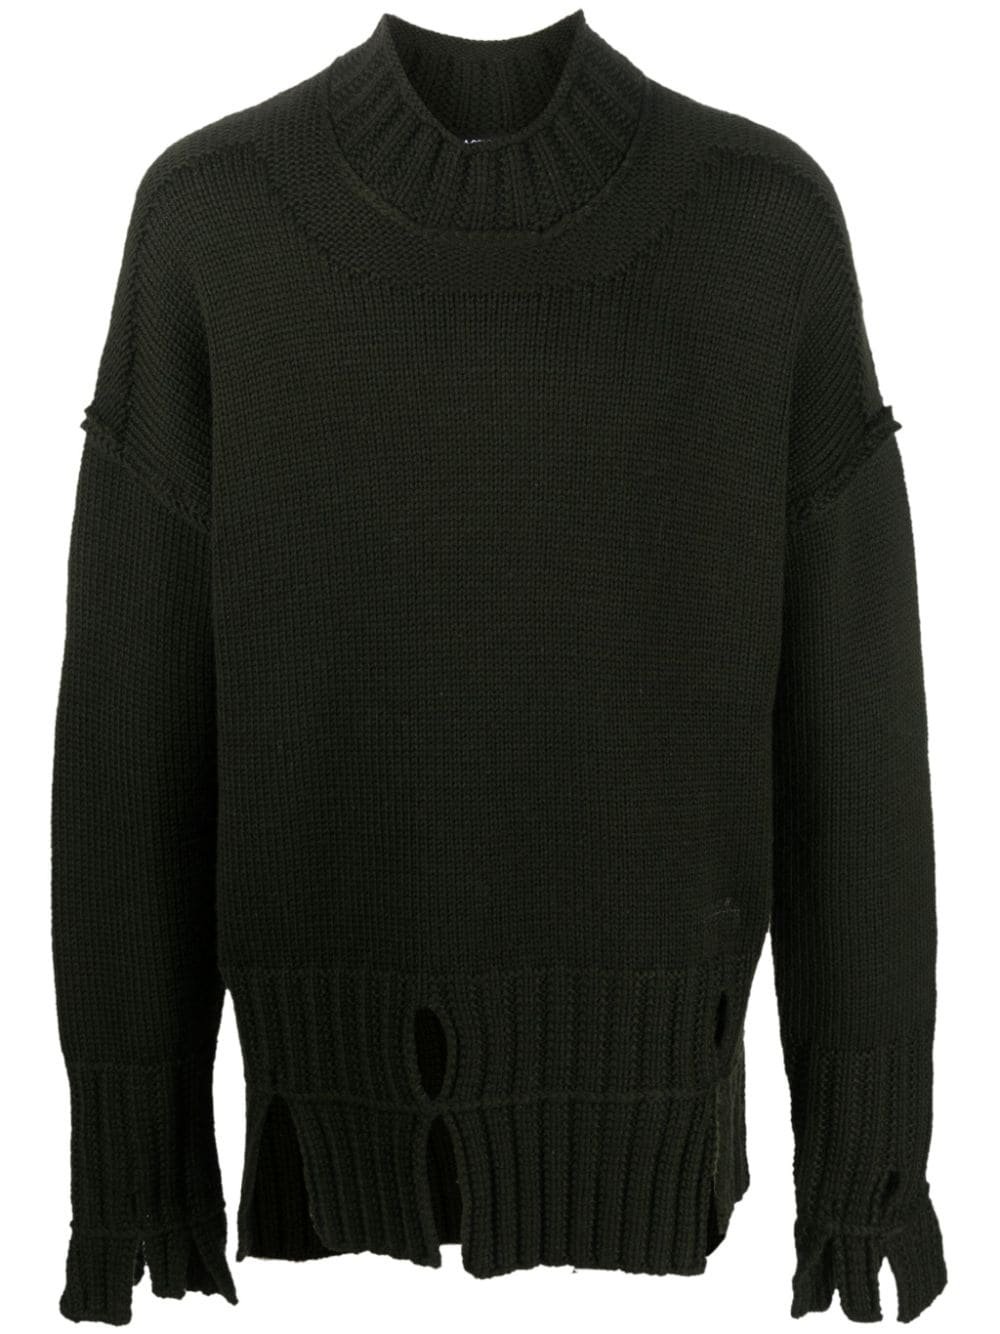 A-COLD-WALL* distressed wool jumper - Green von A-COLD-WALL*